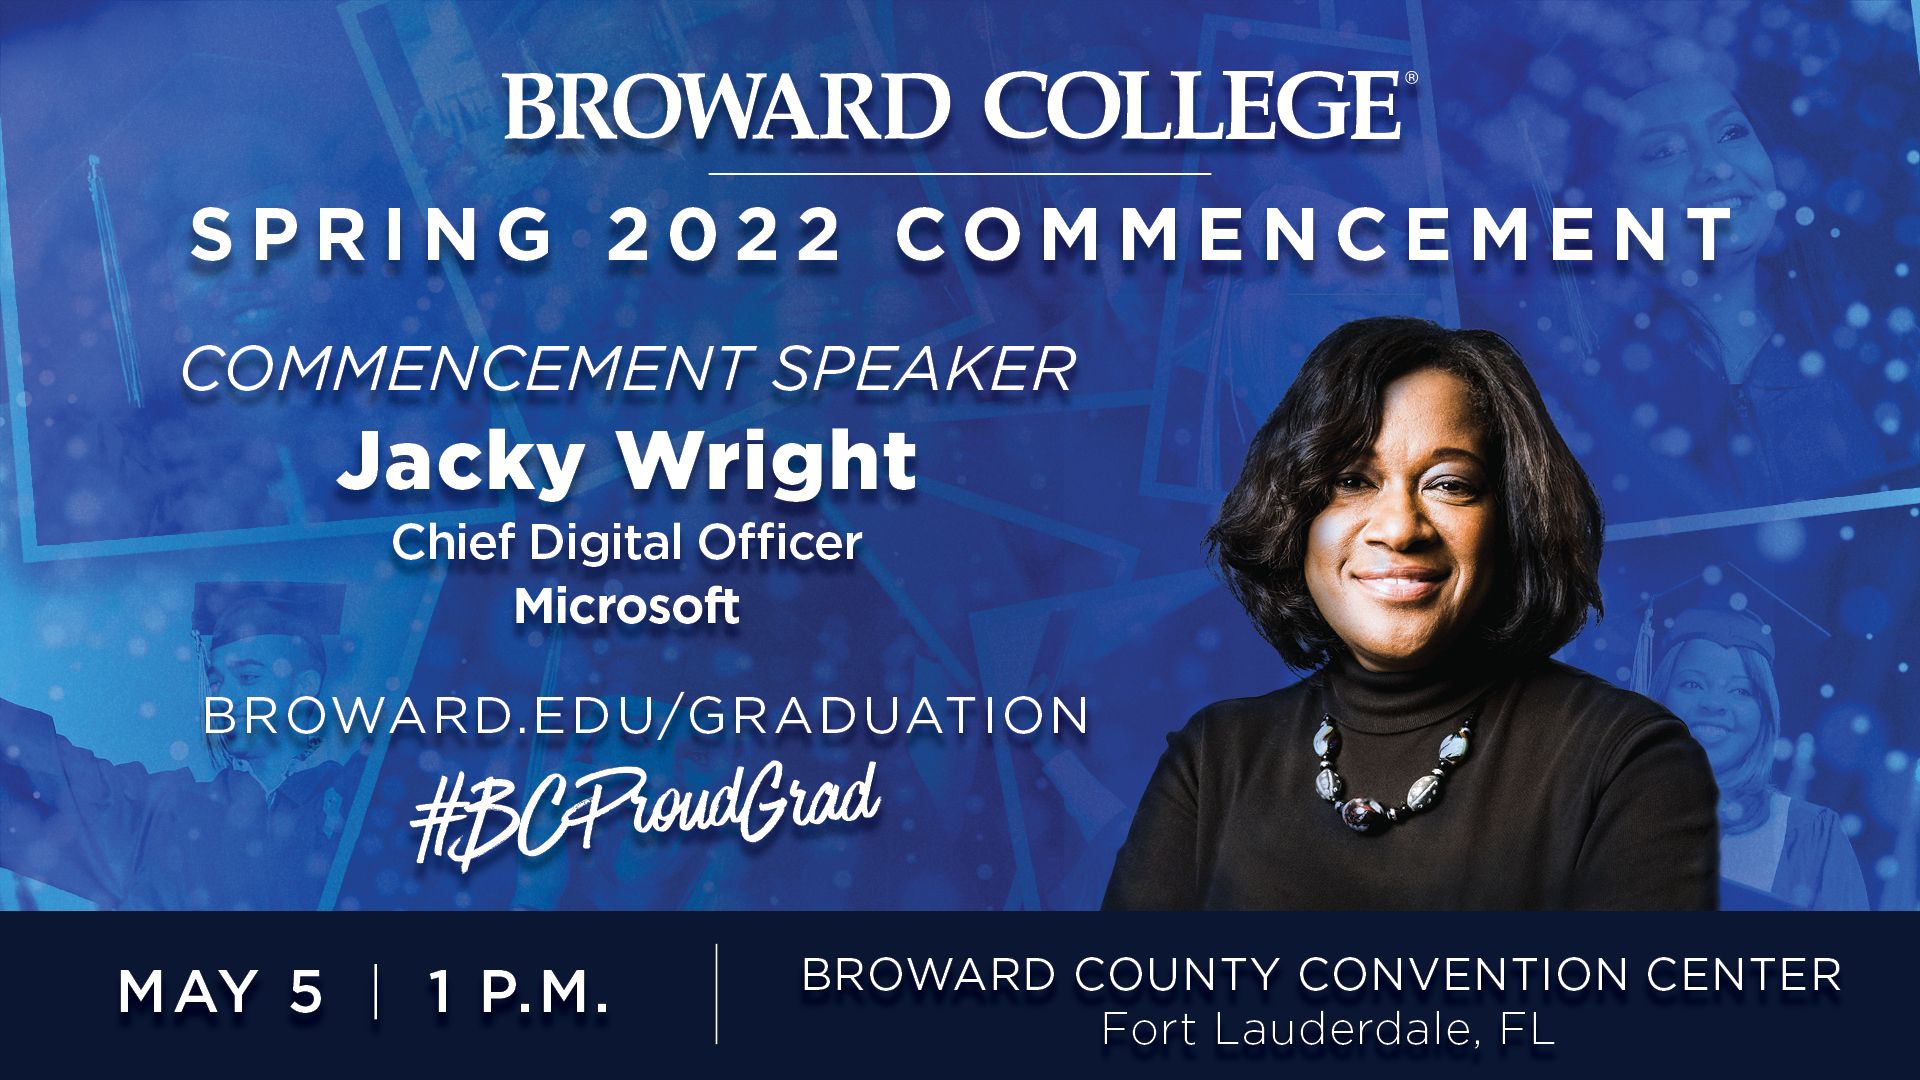 spring 2022 commencement flyer